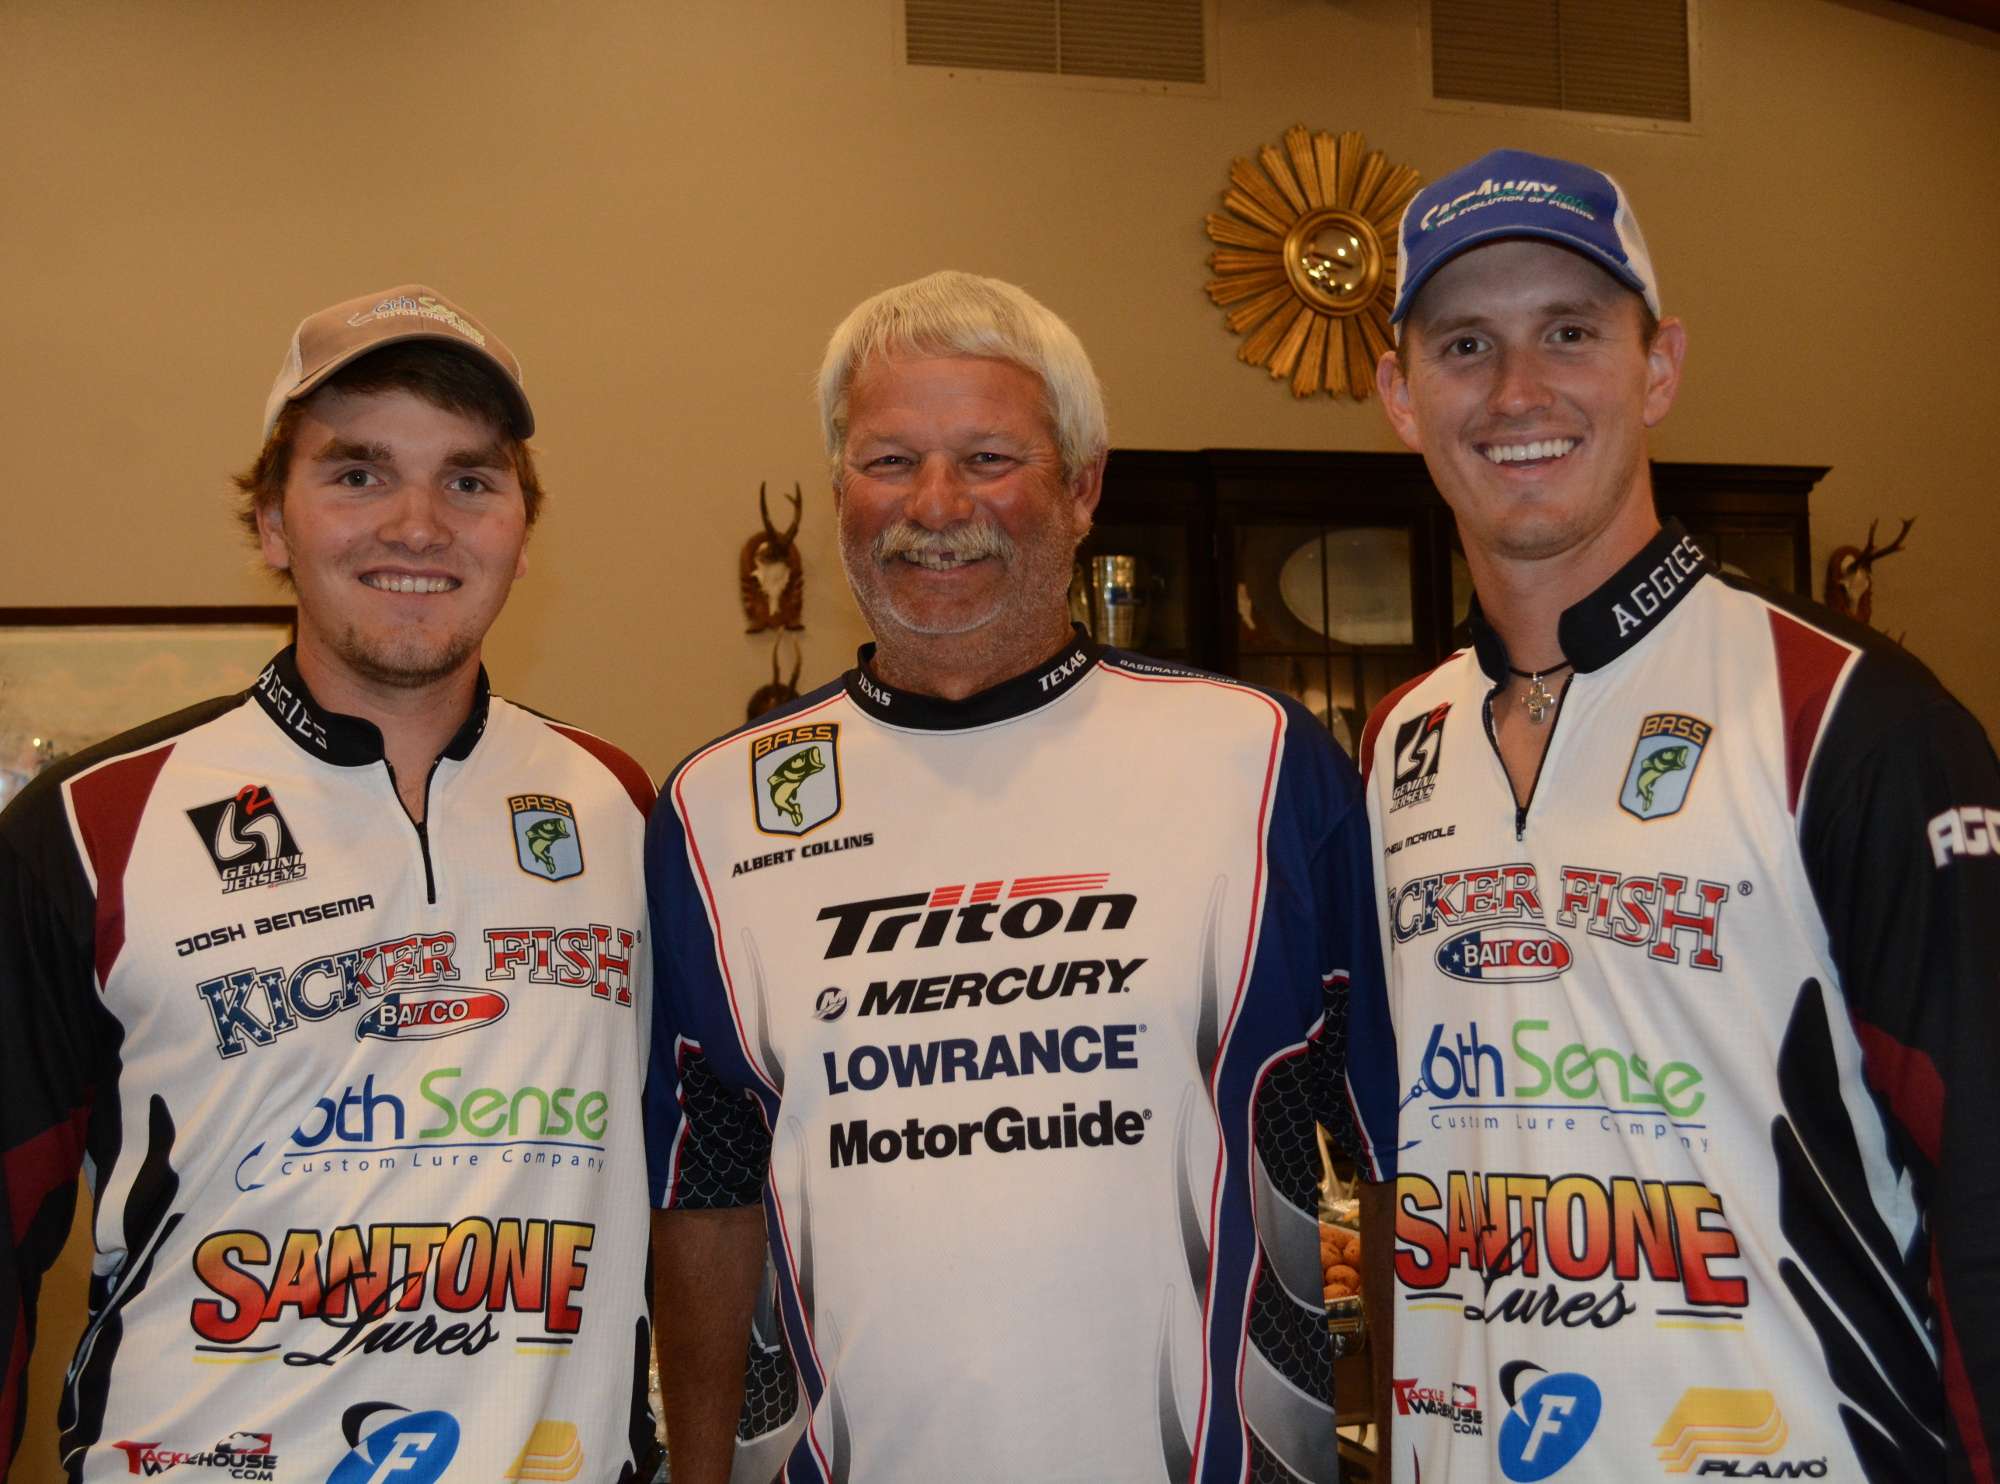 The three enjoyed their time together talking about fishing in Texas. None of them knew at the time that Collins would go on to win the championship a few days later.